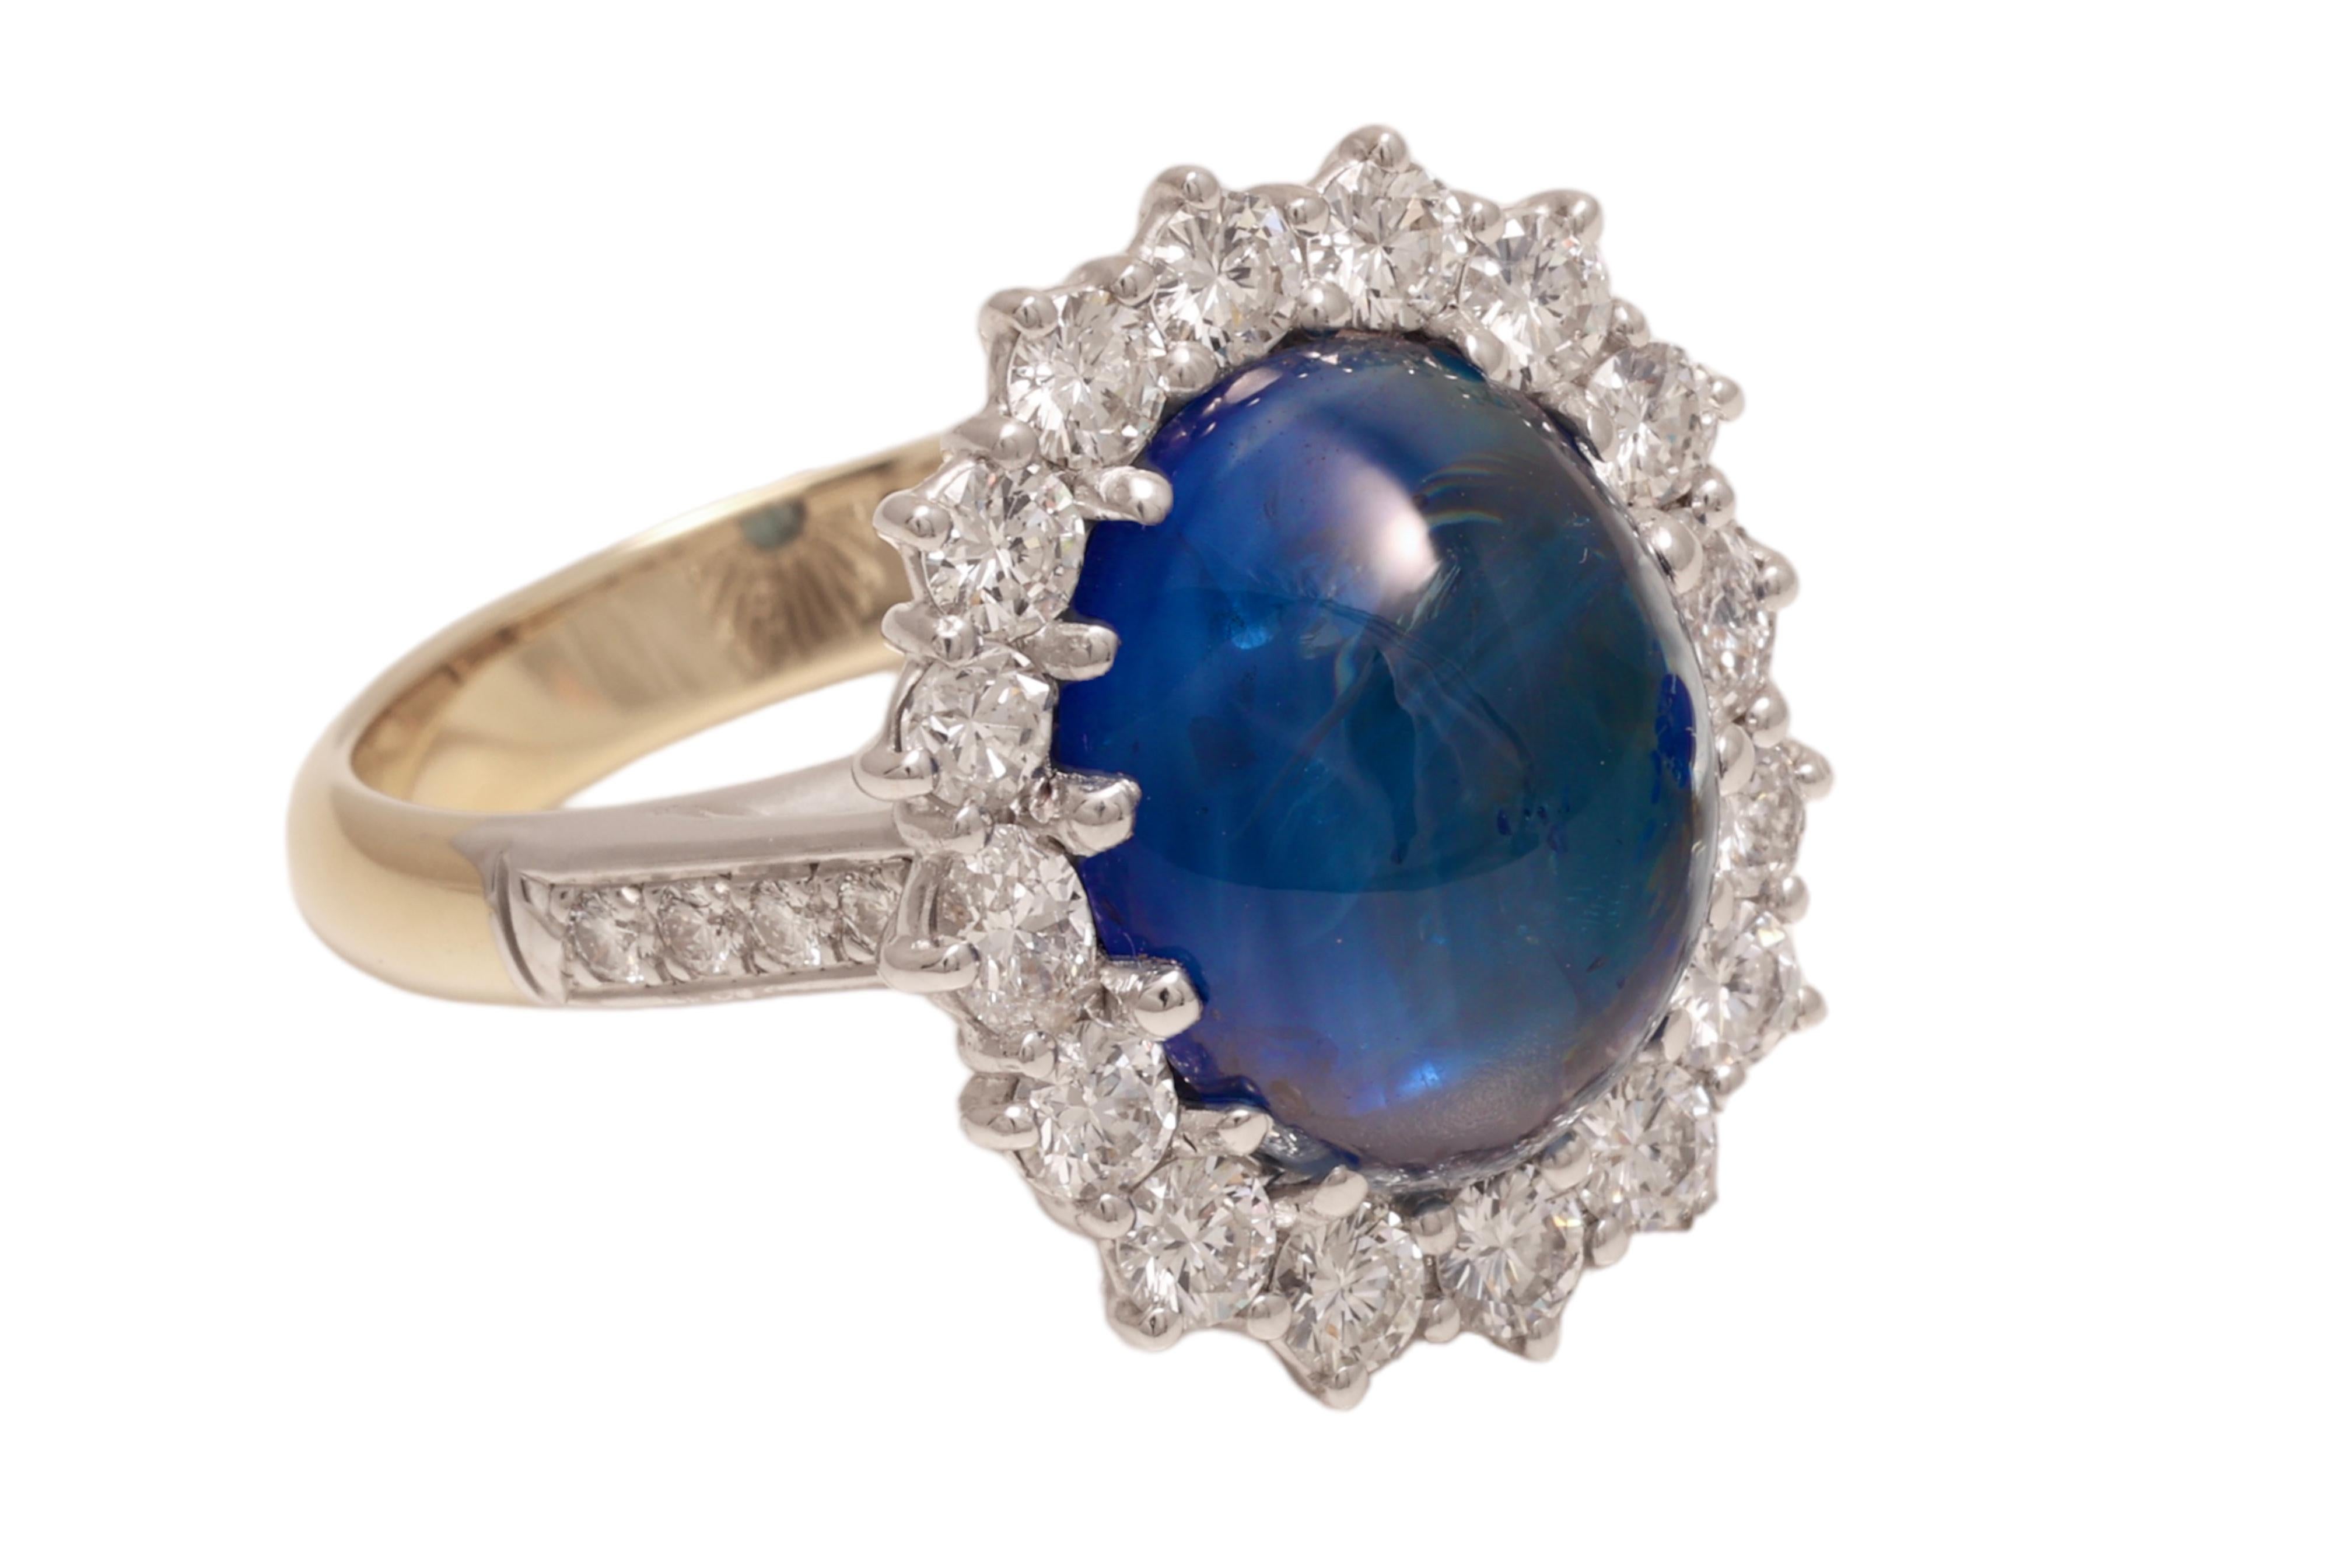 Artisan 18kt Yellow & White Gold Ring With a 9.93Ct Ceylon Cabochon Sapphire & Diamonds  For Sale